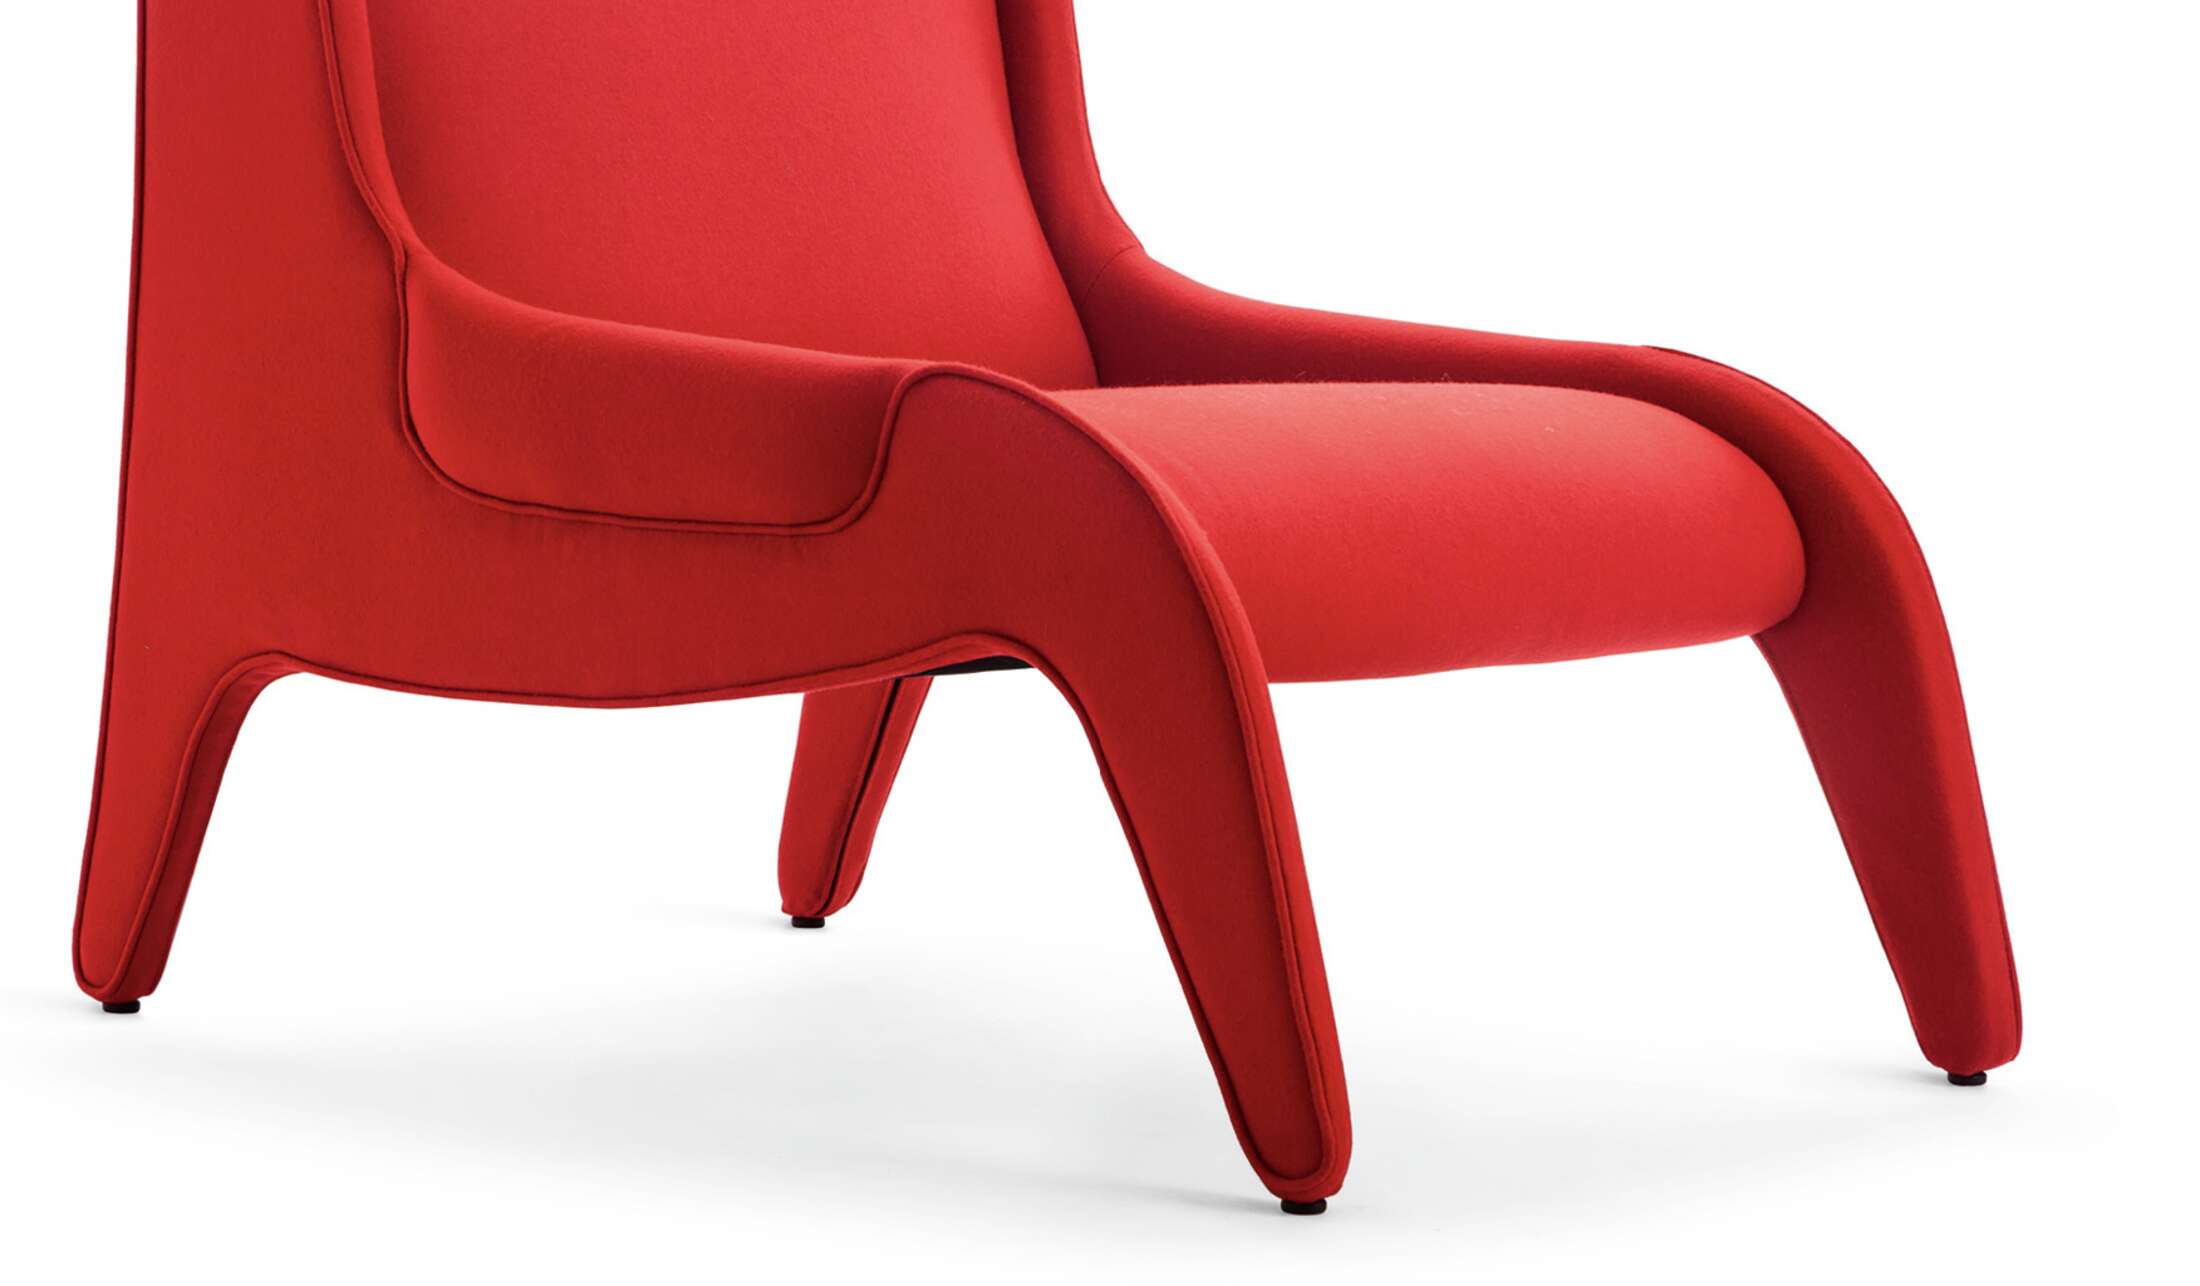 Armchair designed by Marco Zanuso in 1949, relaunched in 2015. Manufactured by Cassina in Italy. The price given applies to the chair as shown in the first picture. Please ask for pricing in other materials and colors.